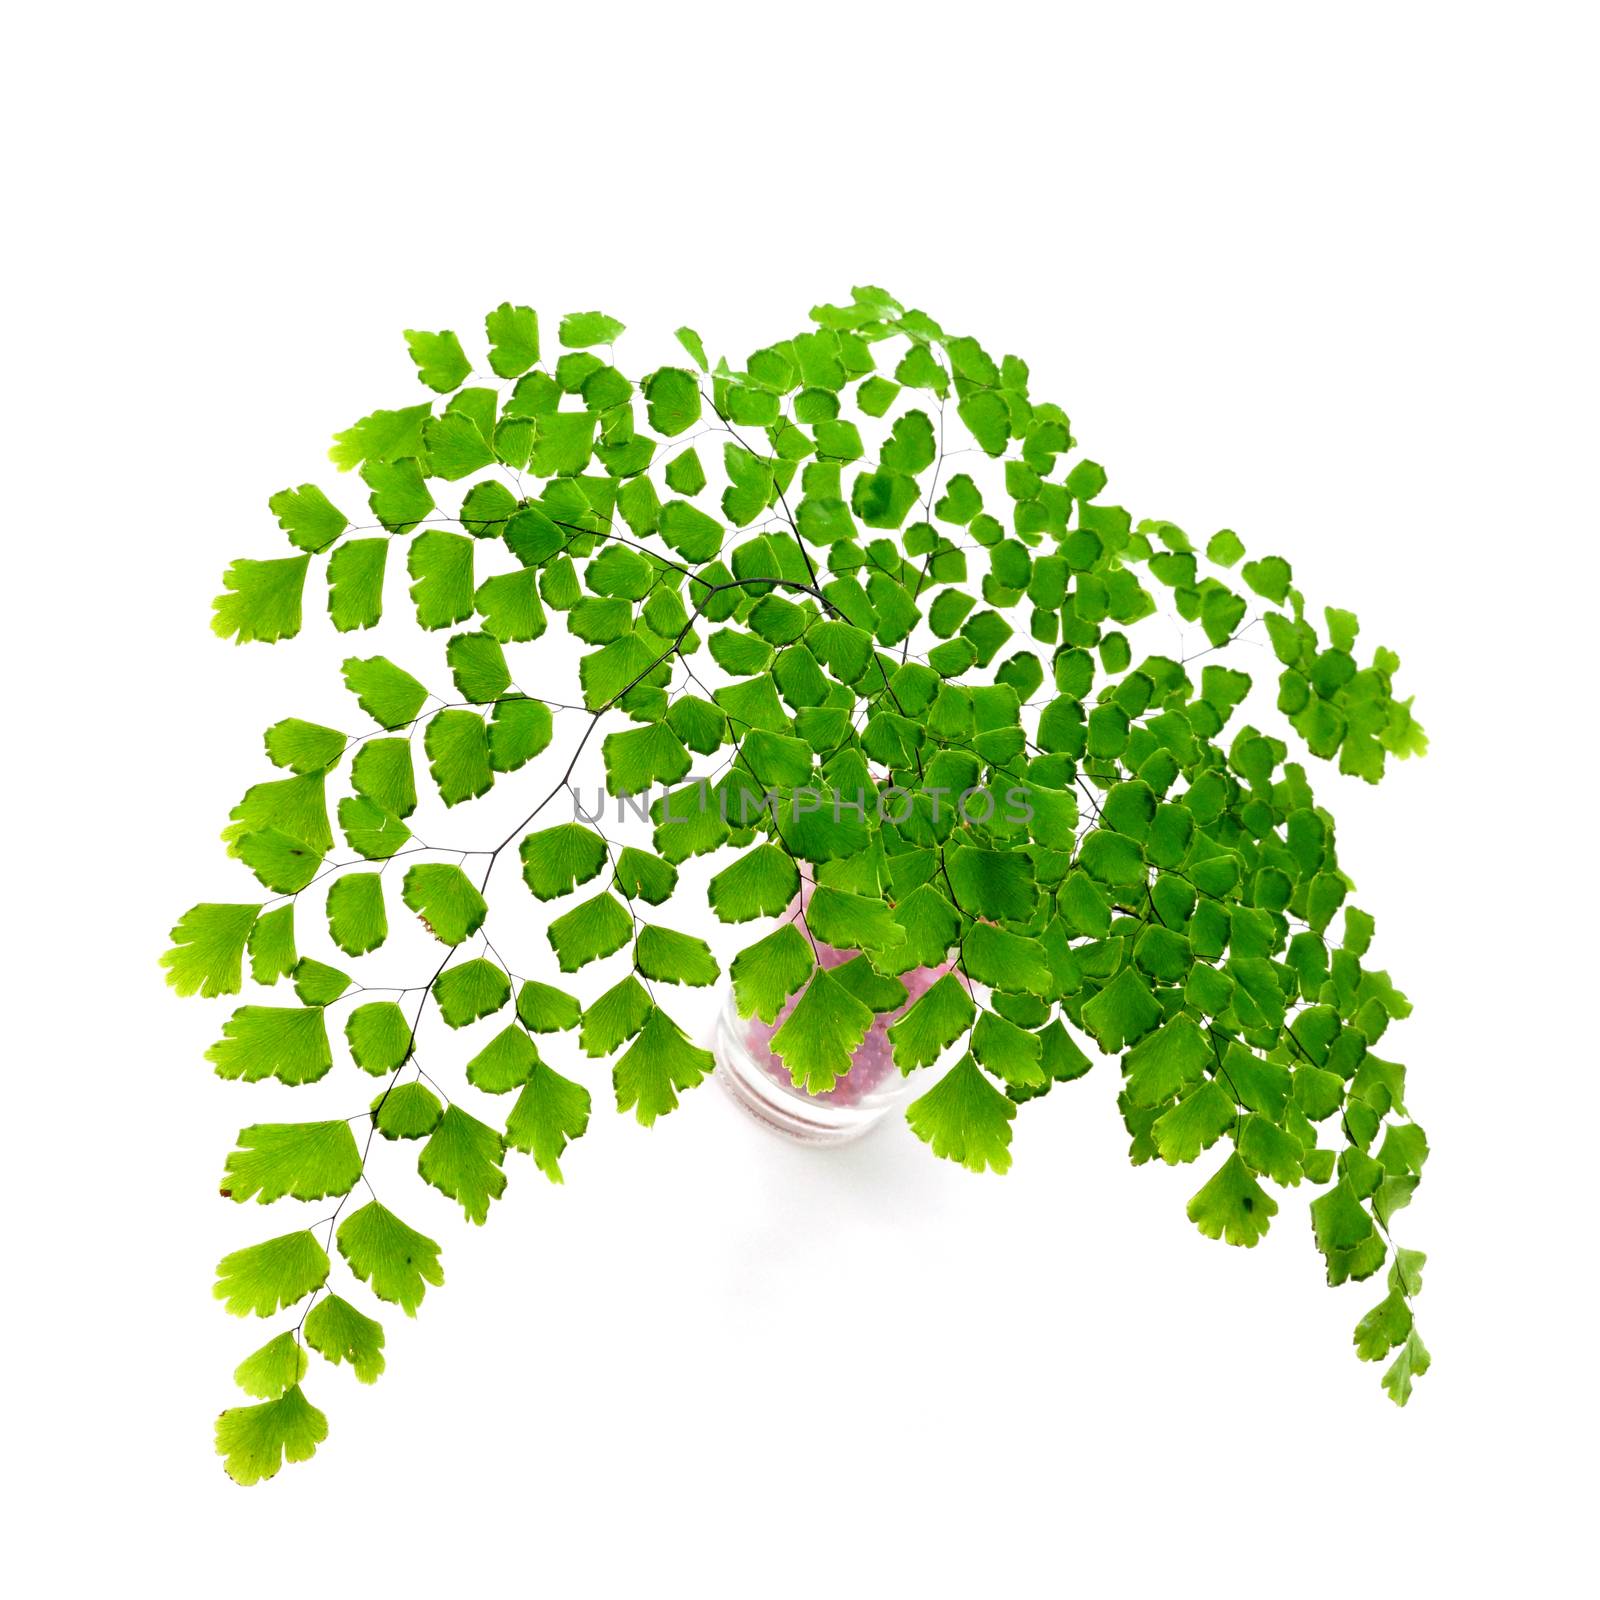 Adiantum fern leaves  on white background by Noppharat_th